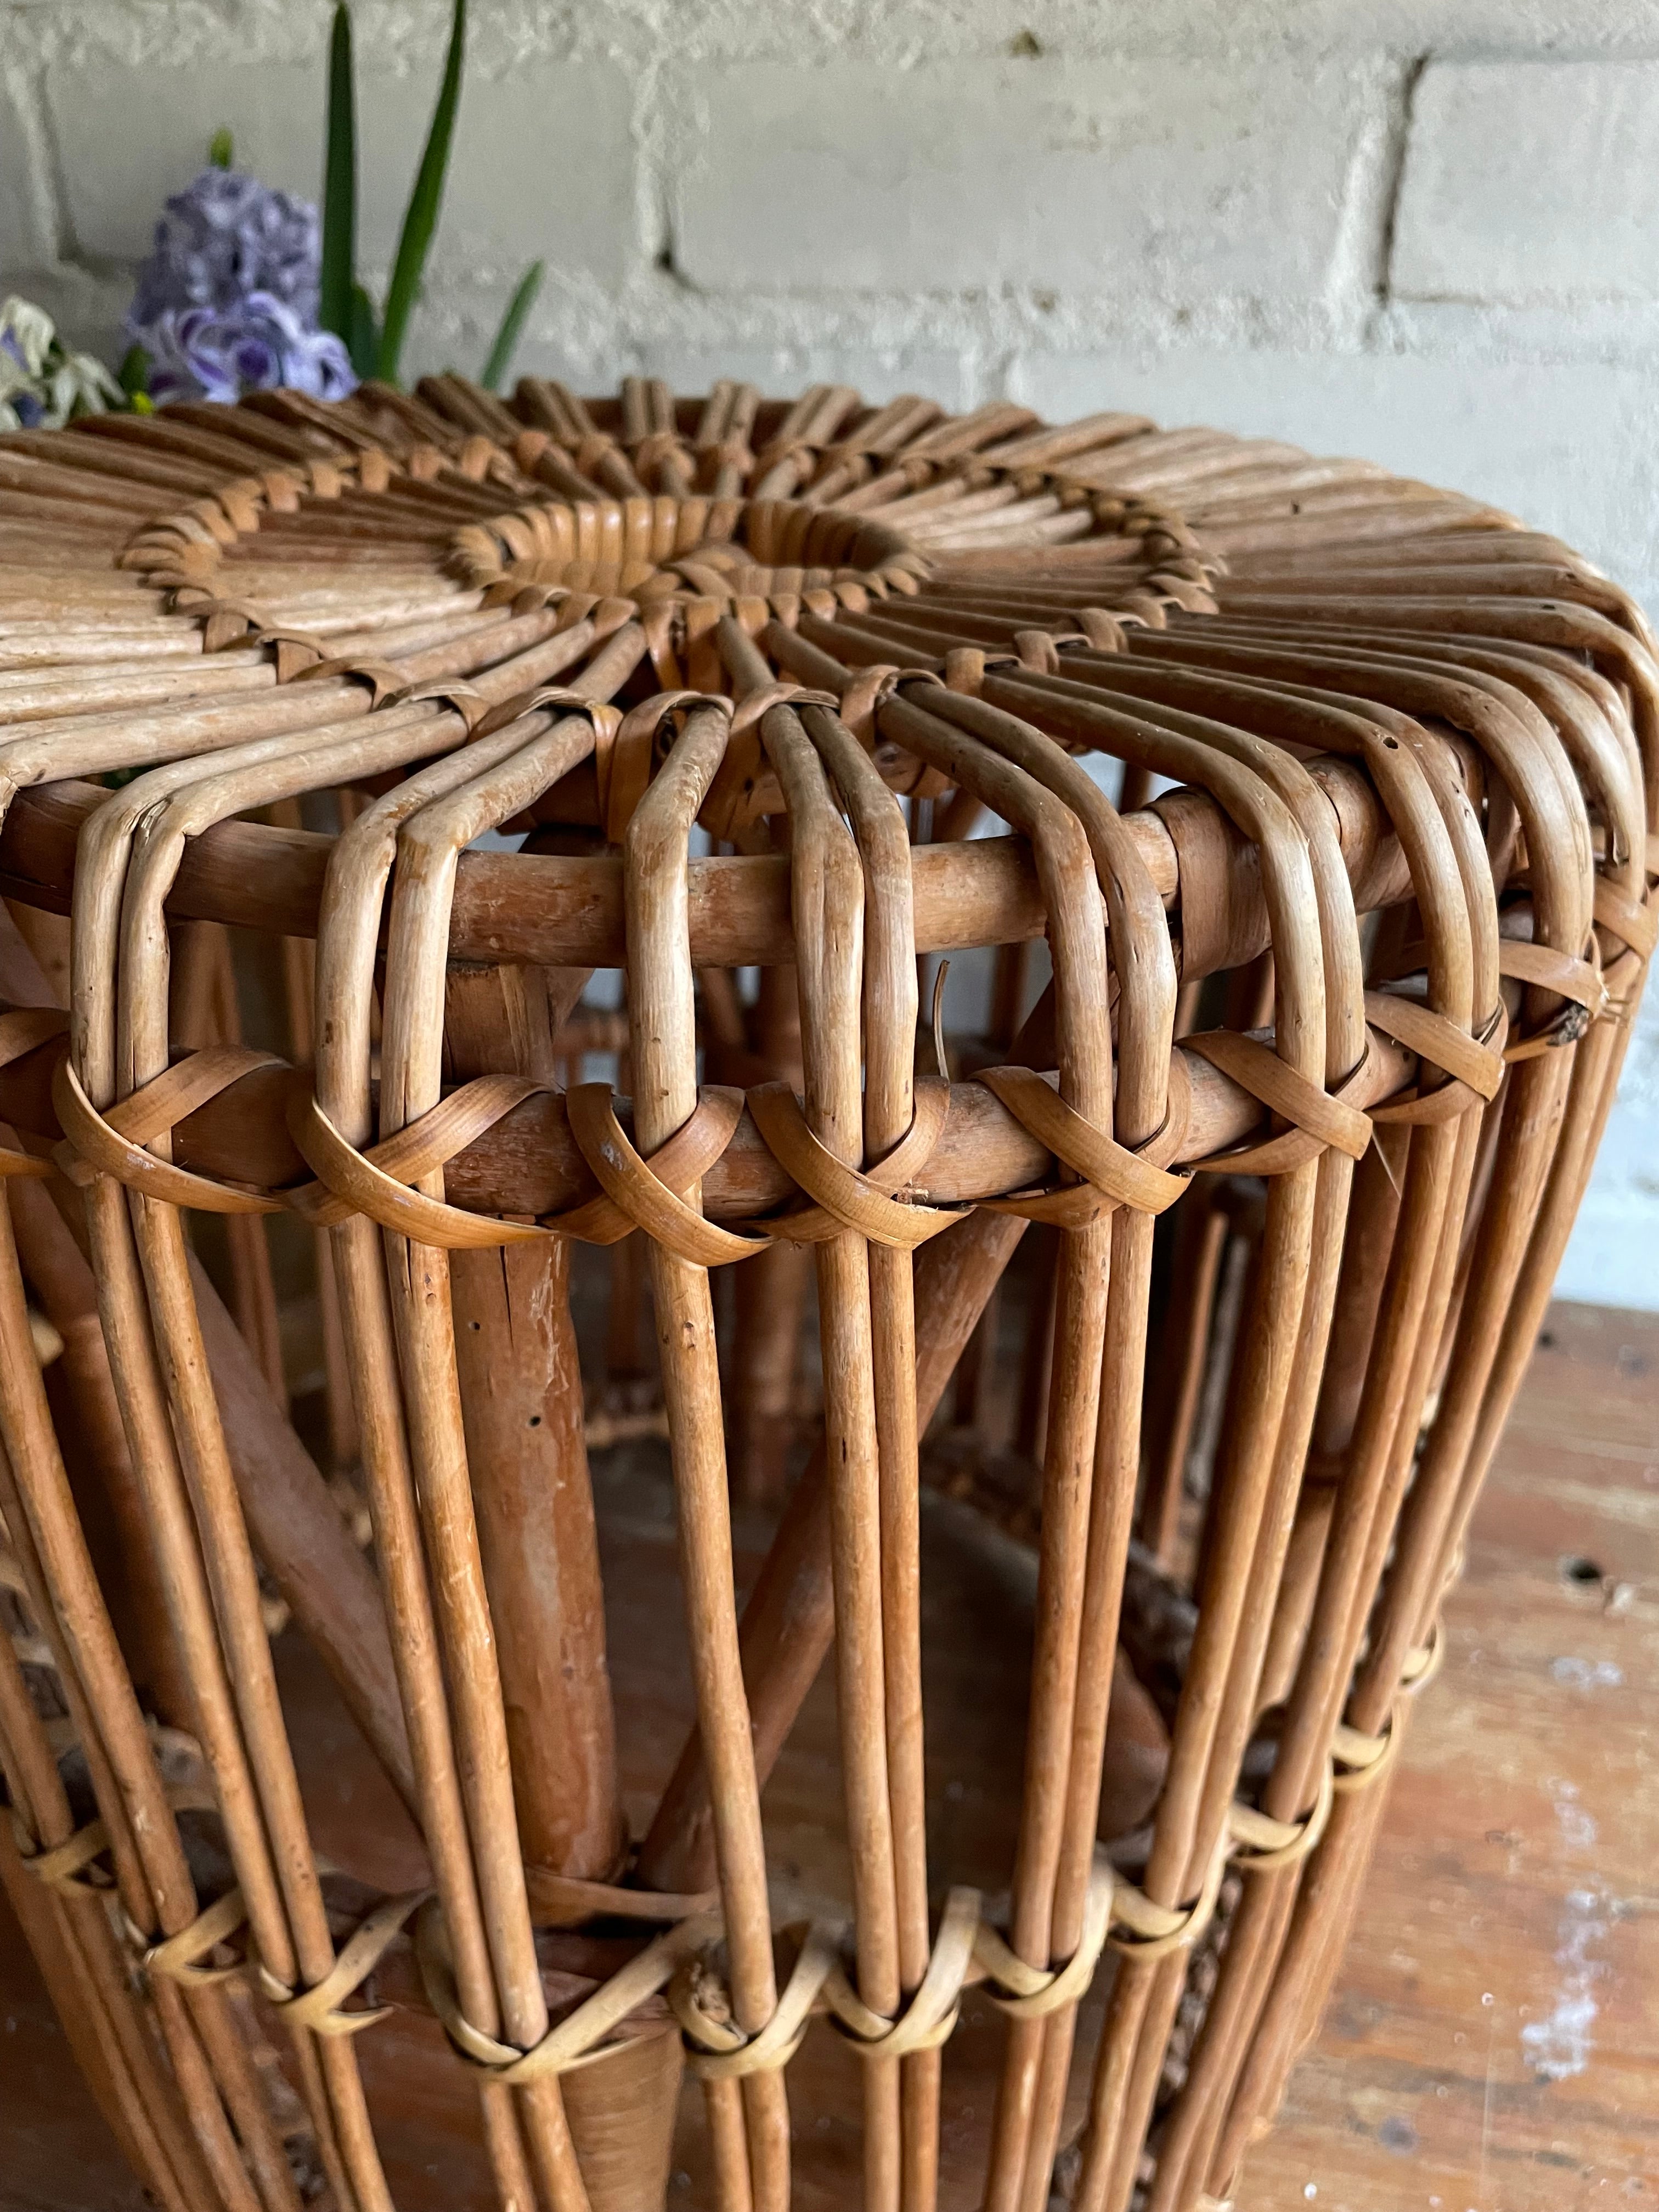 Small Midcentury Rattan Side-Table/Stool in Franco Albini style